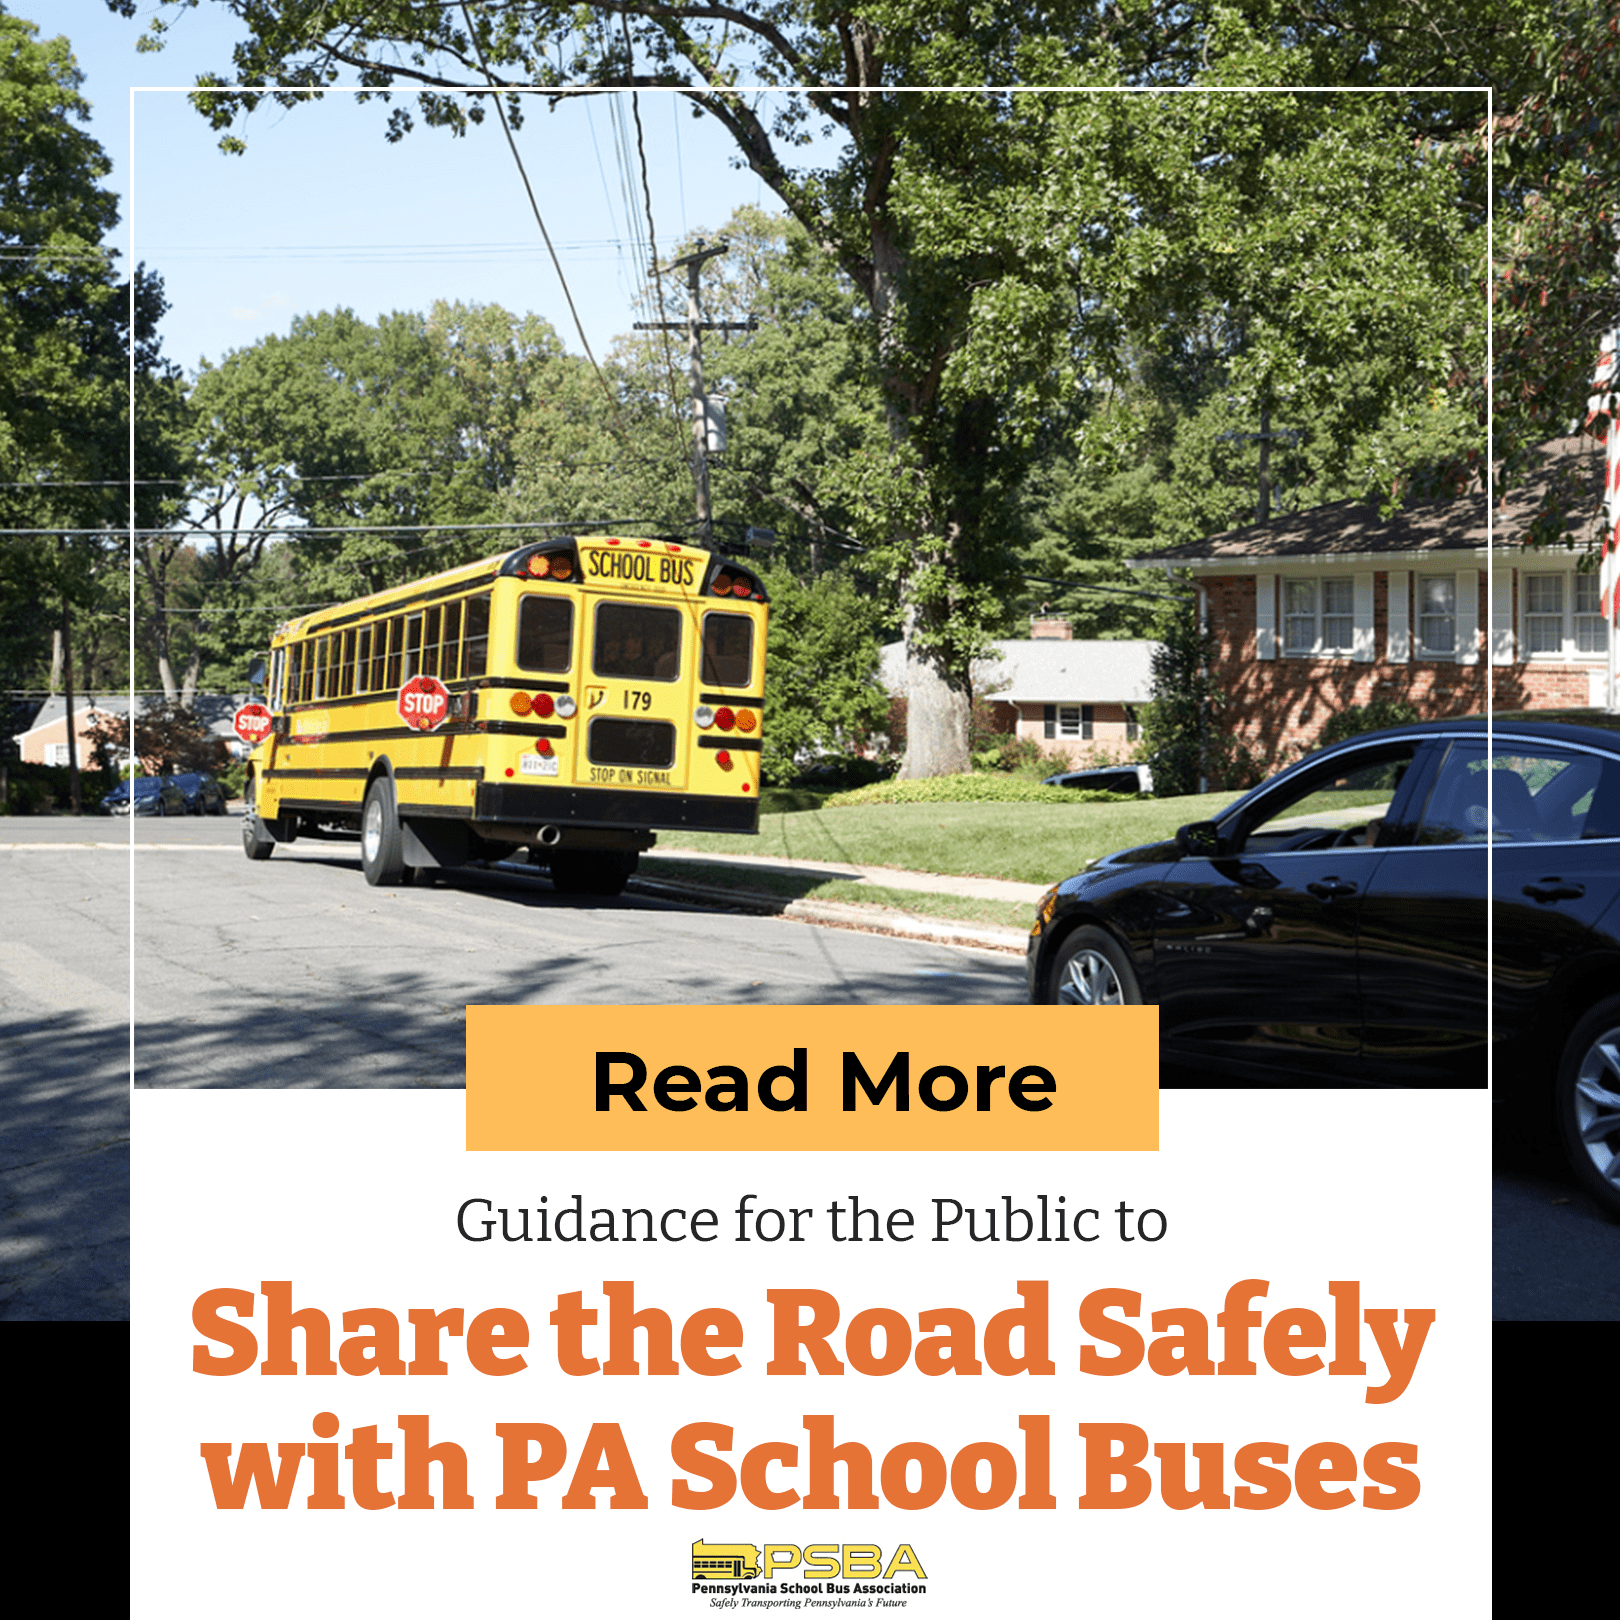 Guidance for the Public to Share Road Safely with PA School Buses